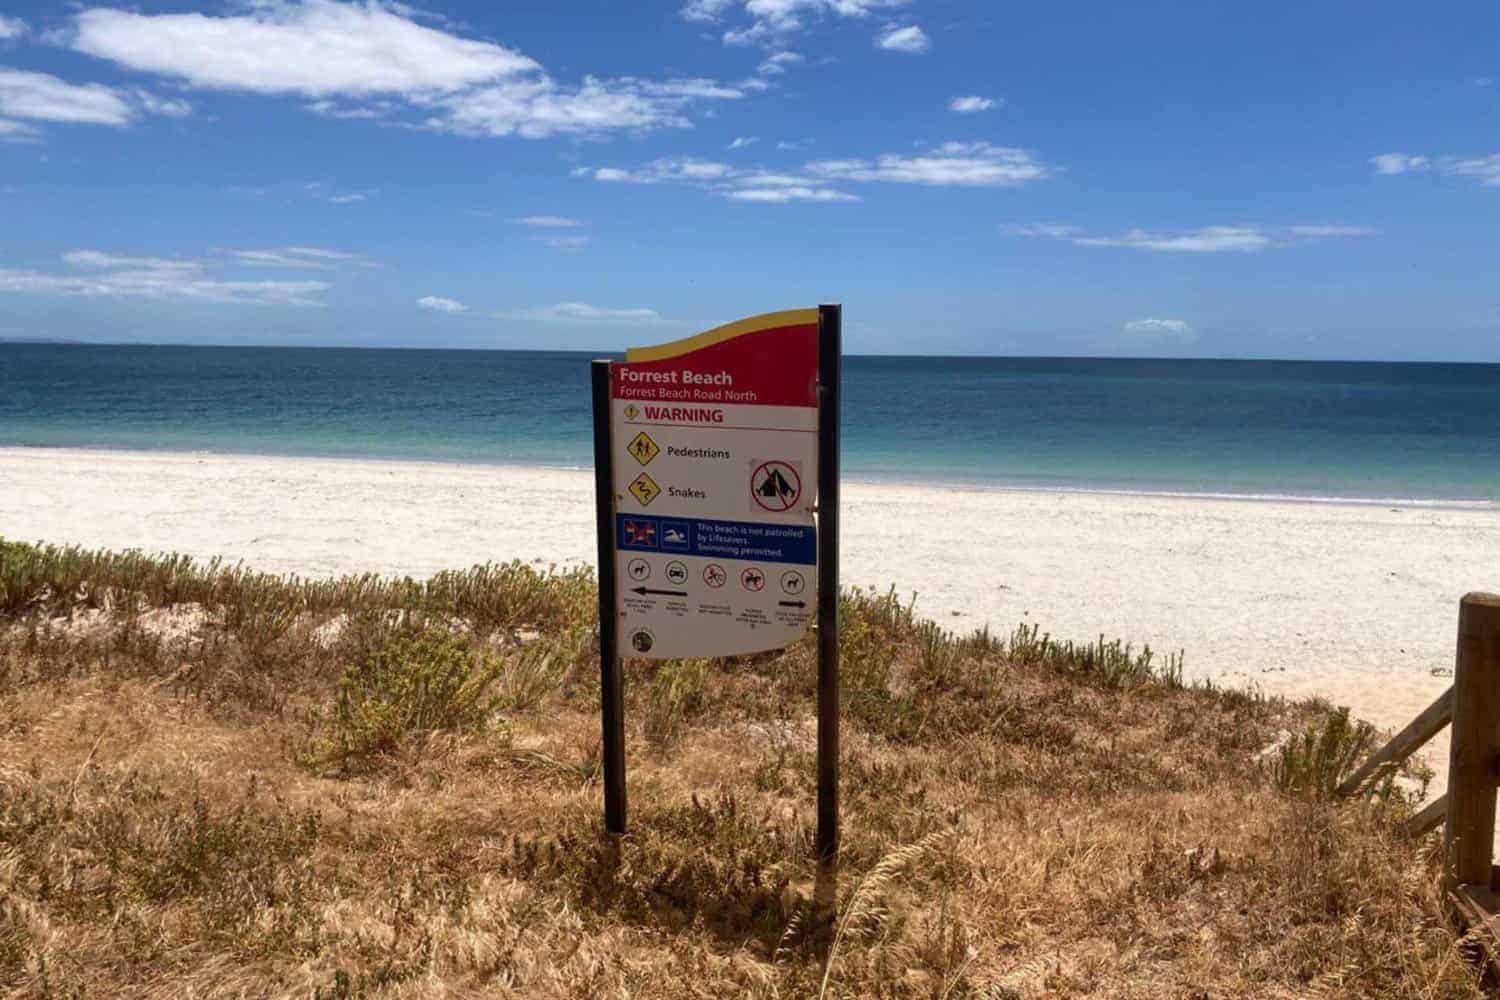 Warning sign at the entrance to Forrest Beach, with a clear view of the sandy beach and calm ocean in the background, indicating a pedestrian area with cautions about snakes and no lifeguard on duty.